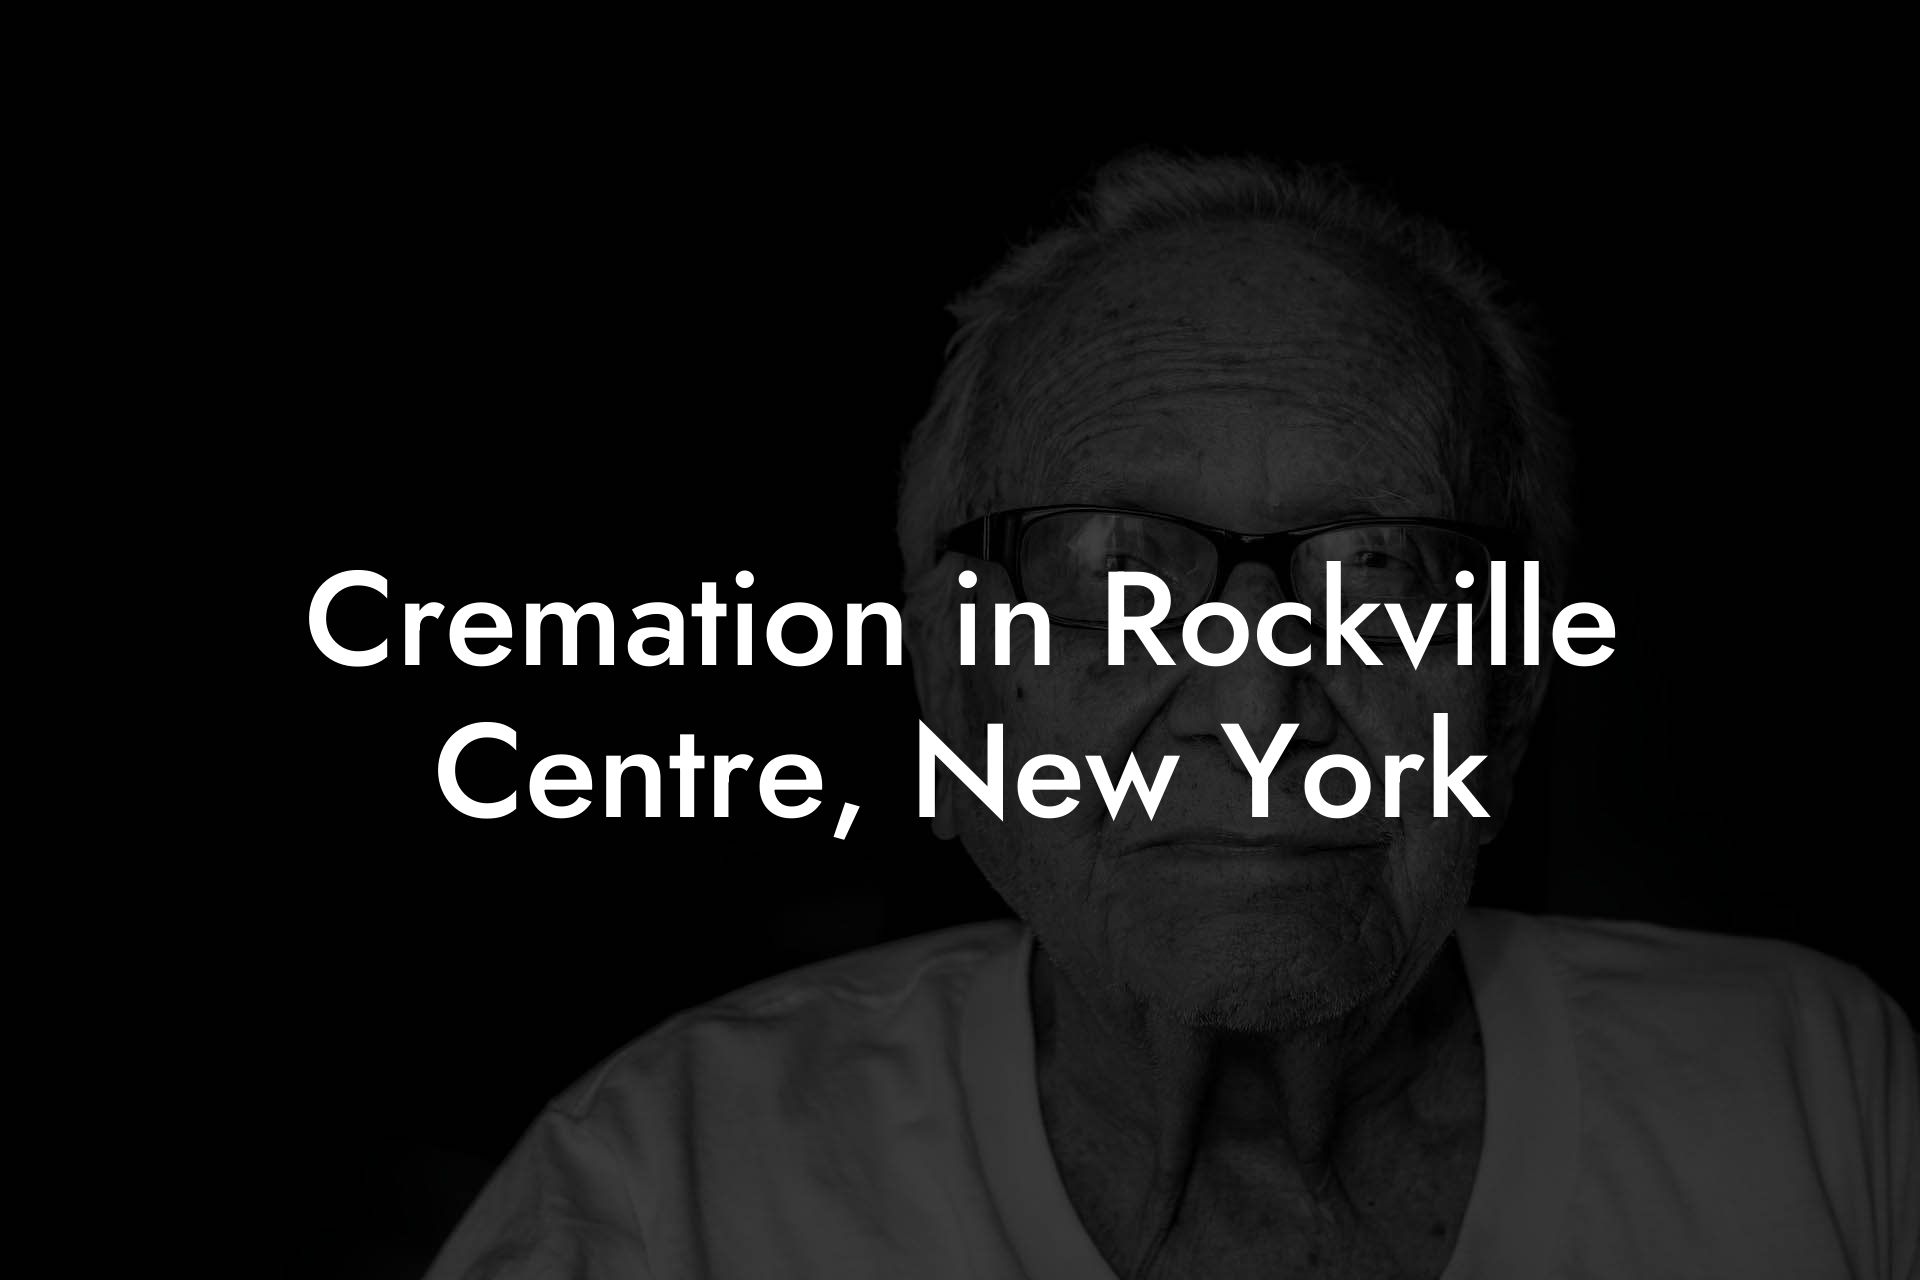 Cremation in Rockville Centre, New York